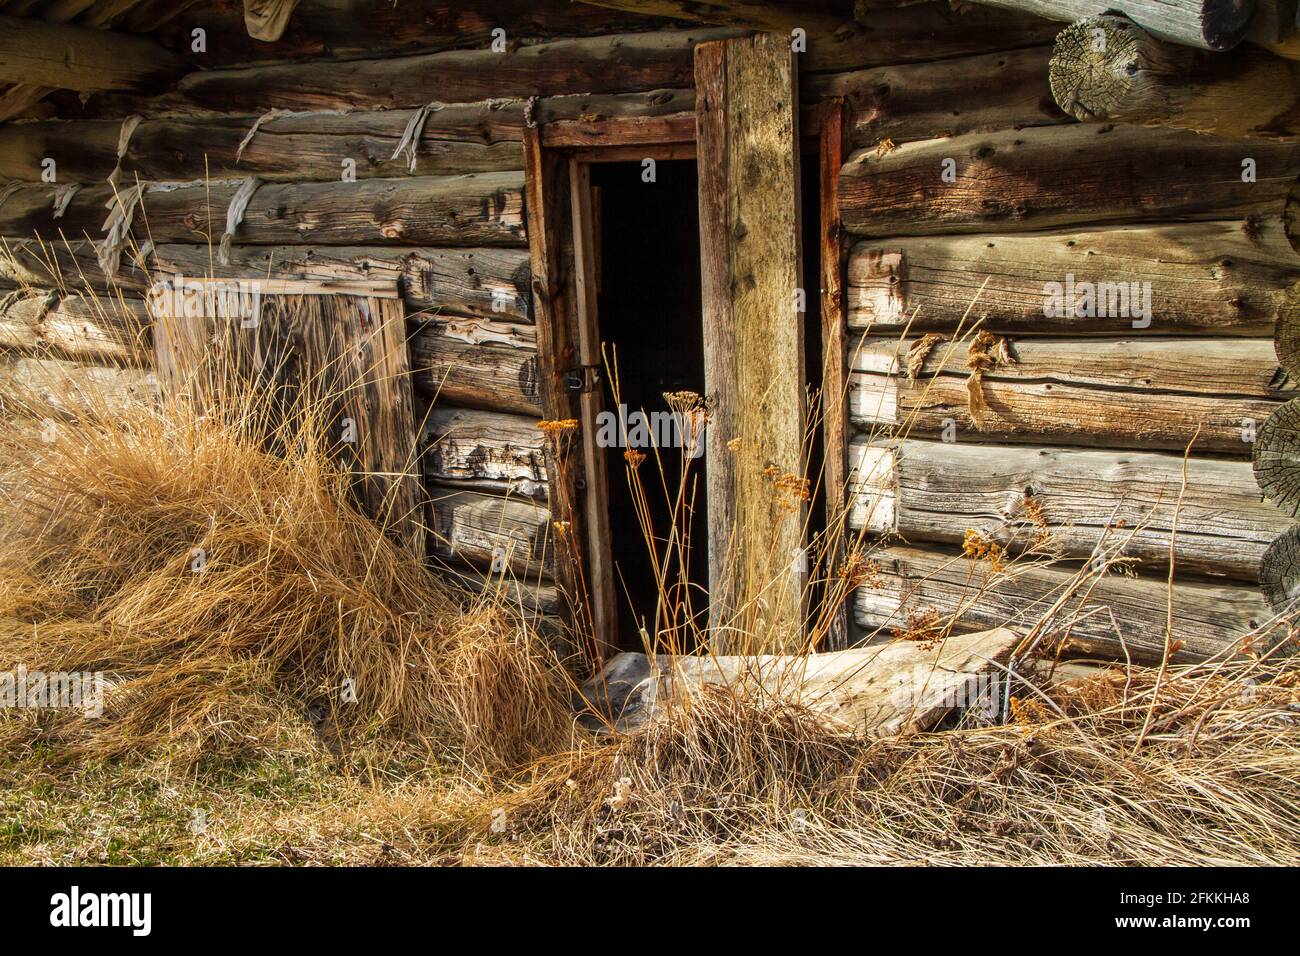 Old miner's log cabin built in the 1800's during the gold rush in Atlin, in northern British Columbia. Stock Photo